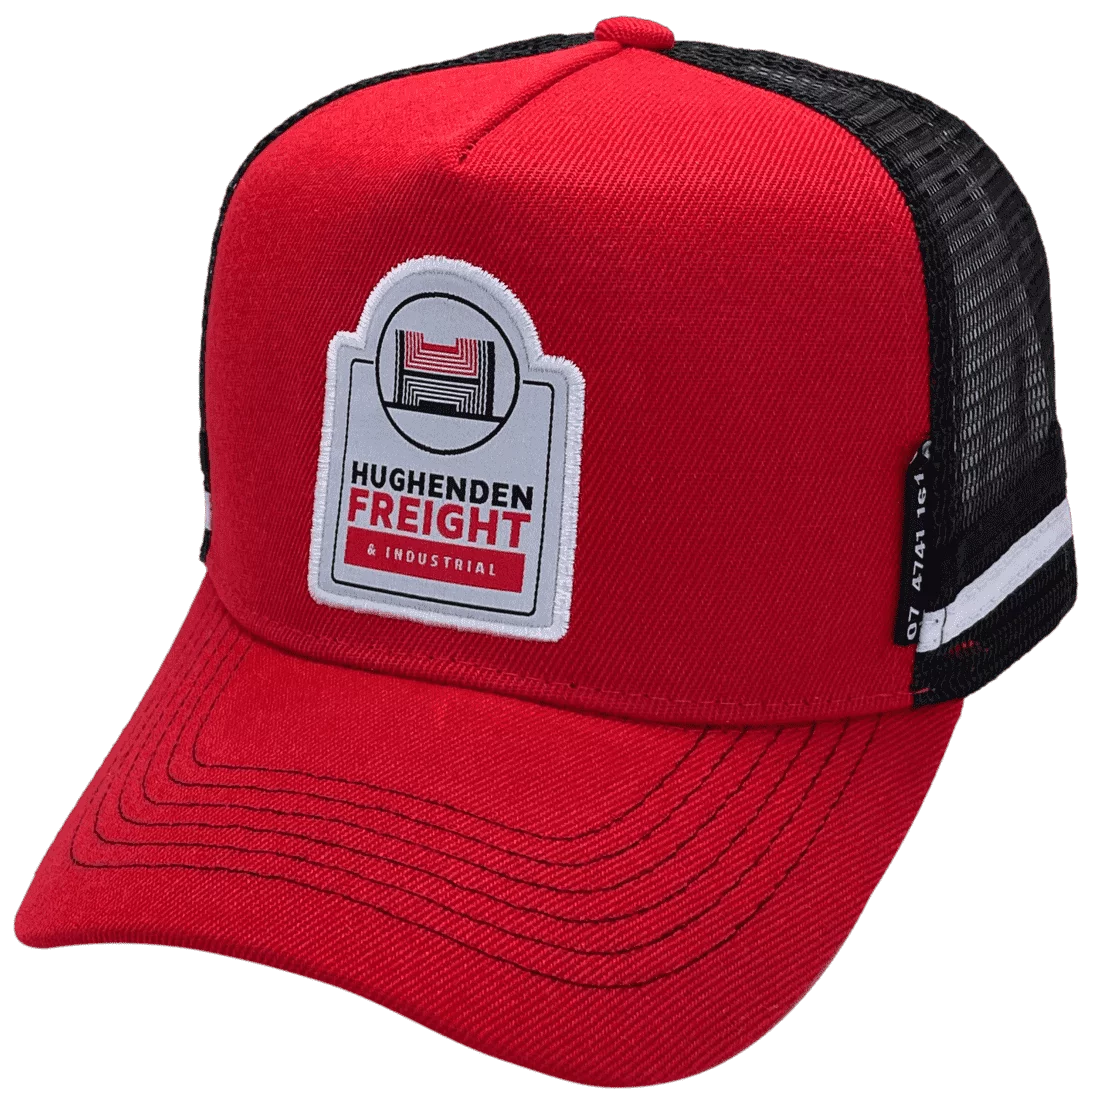 Hughenden Freight & Industrial Qld HP Original Midrange Aussie Trucker Hat with double side bands Acrylic Red Black White with woven badge